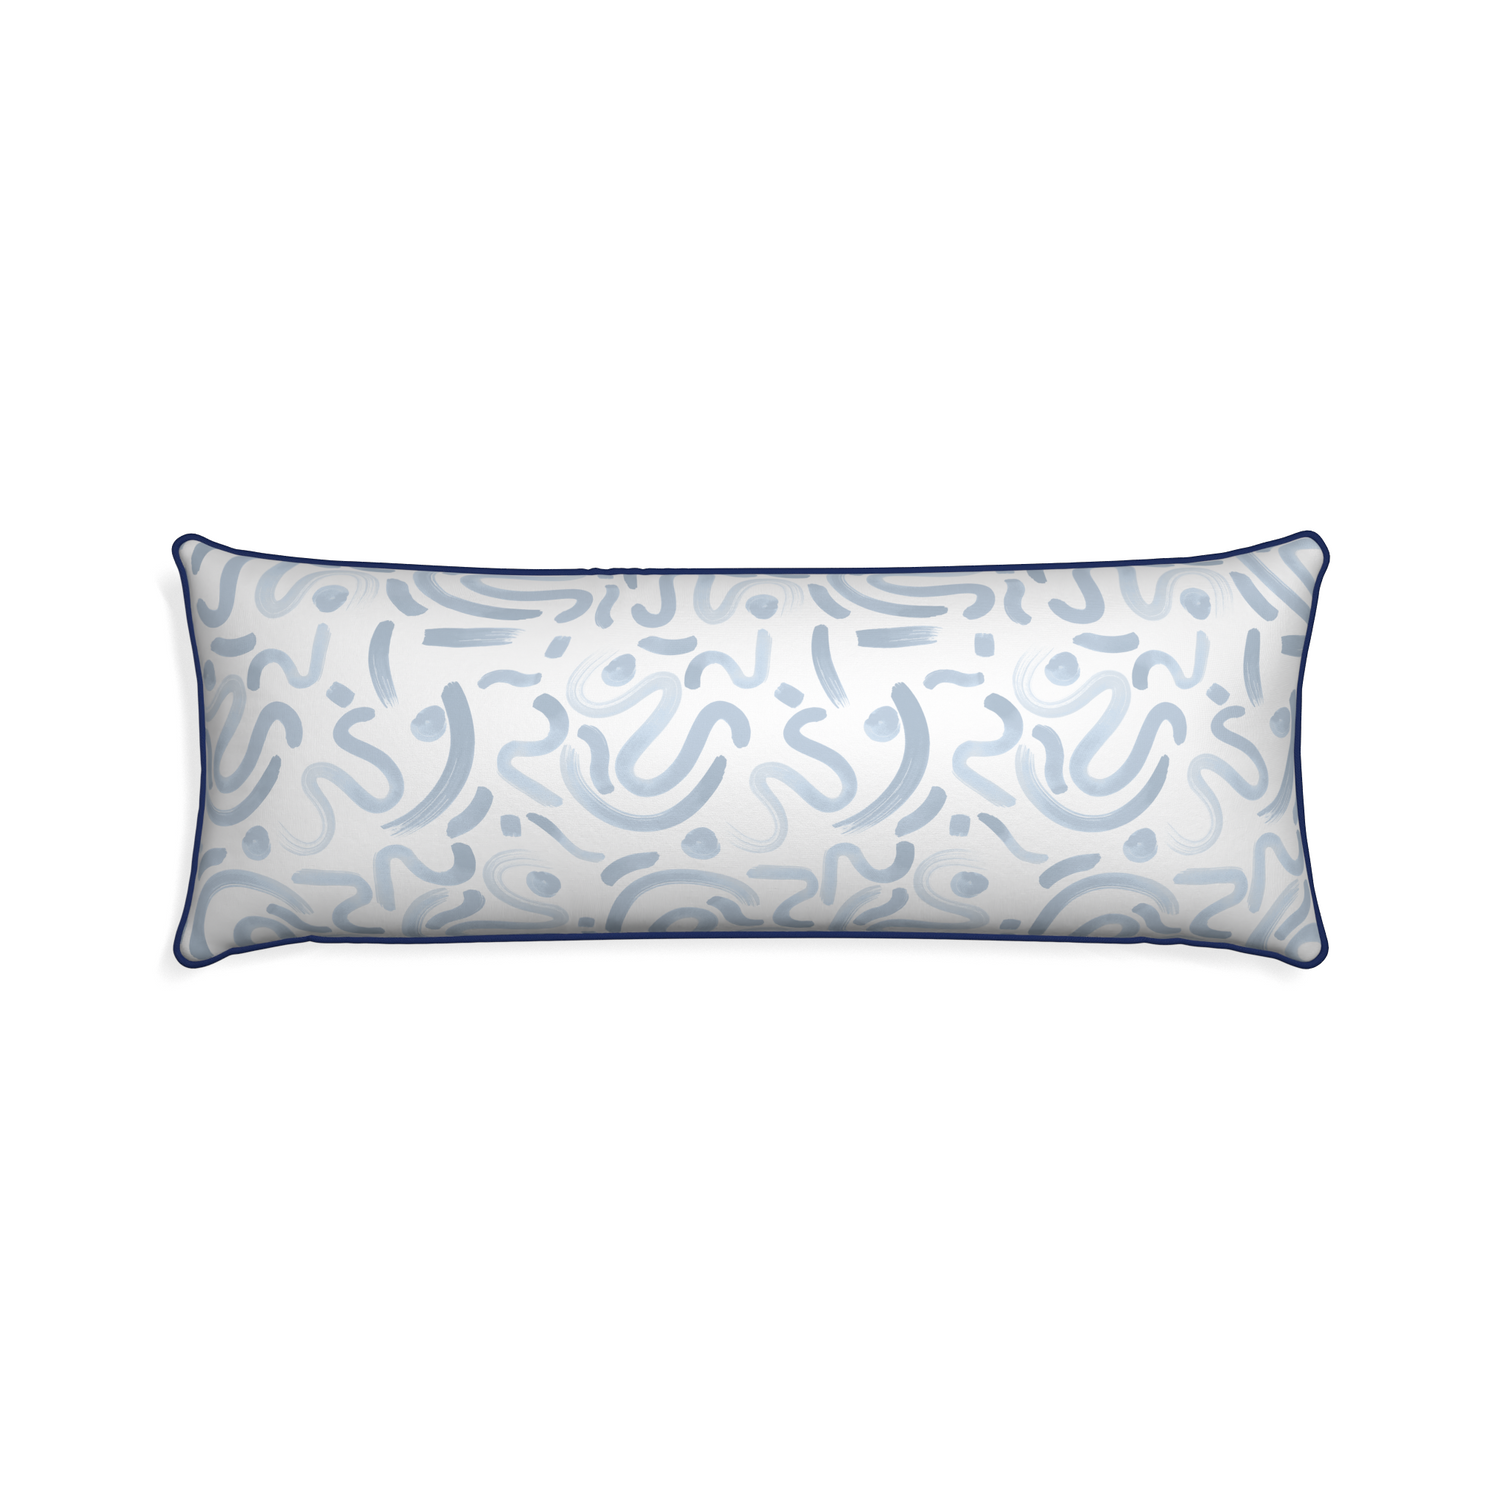 Xl-lumbar hockney sky custom pillow with midnight piping on white background